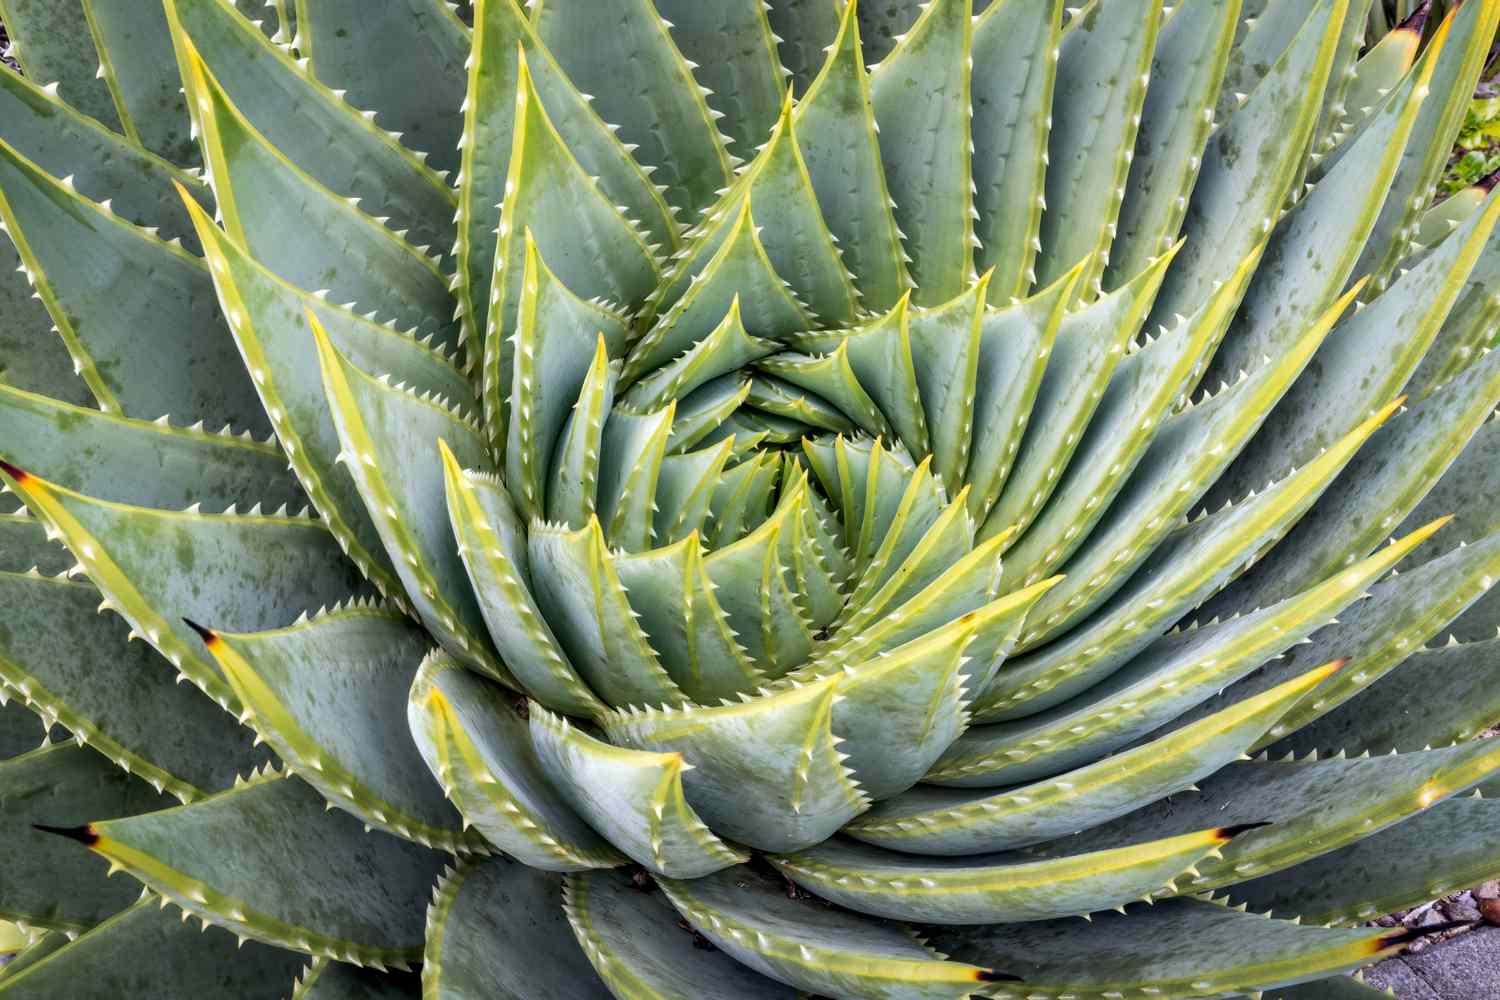 Spiral aloe vera succulent with triangular leaves spiraling inward with spiked edges closeup